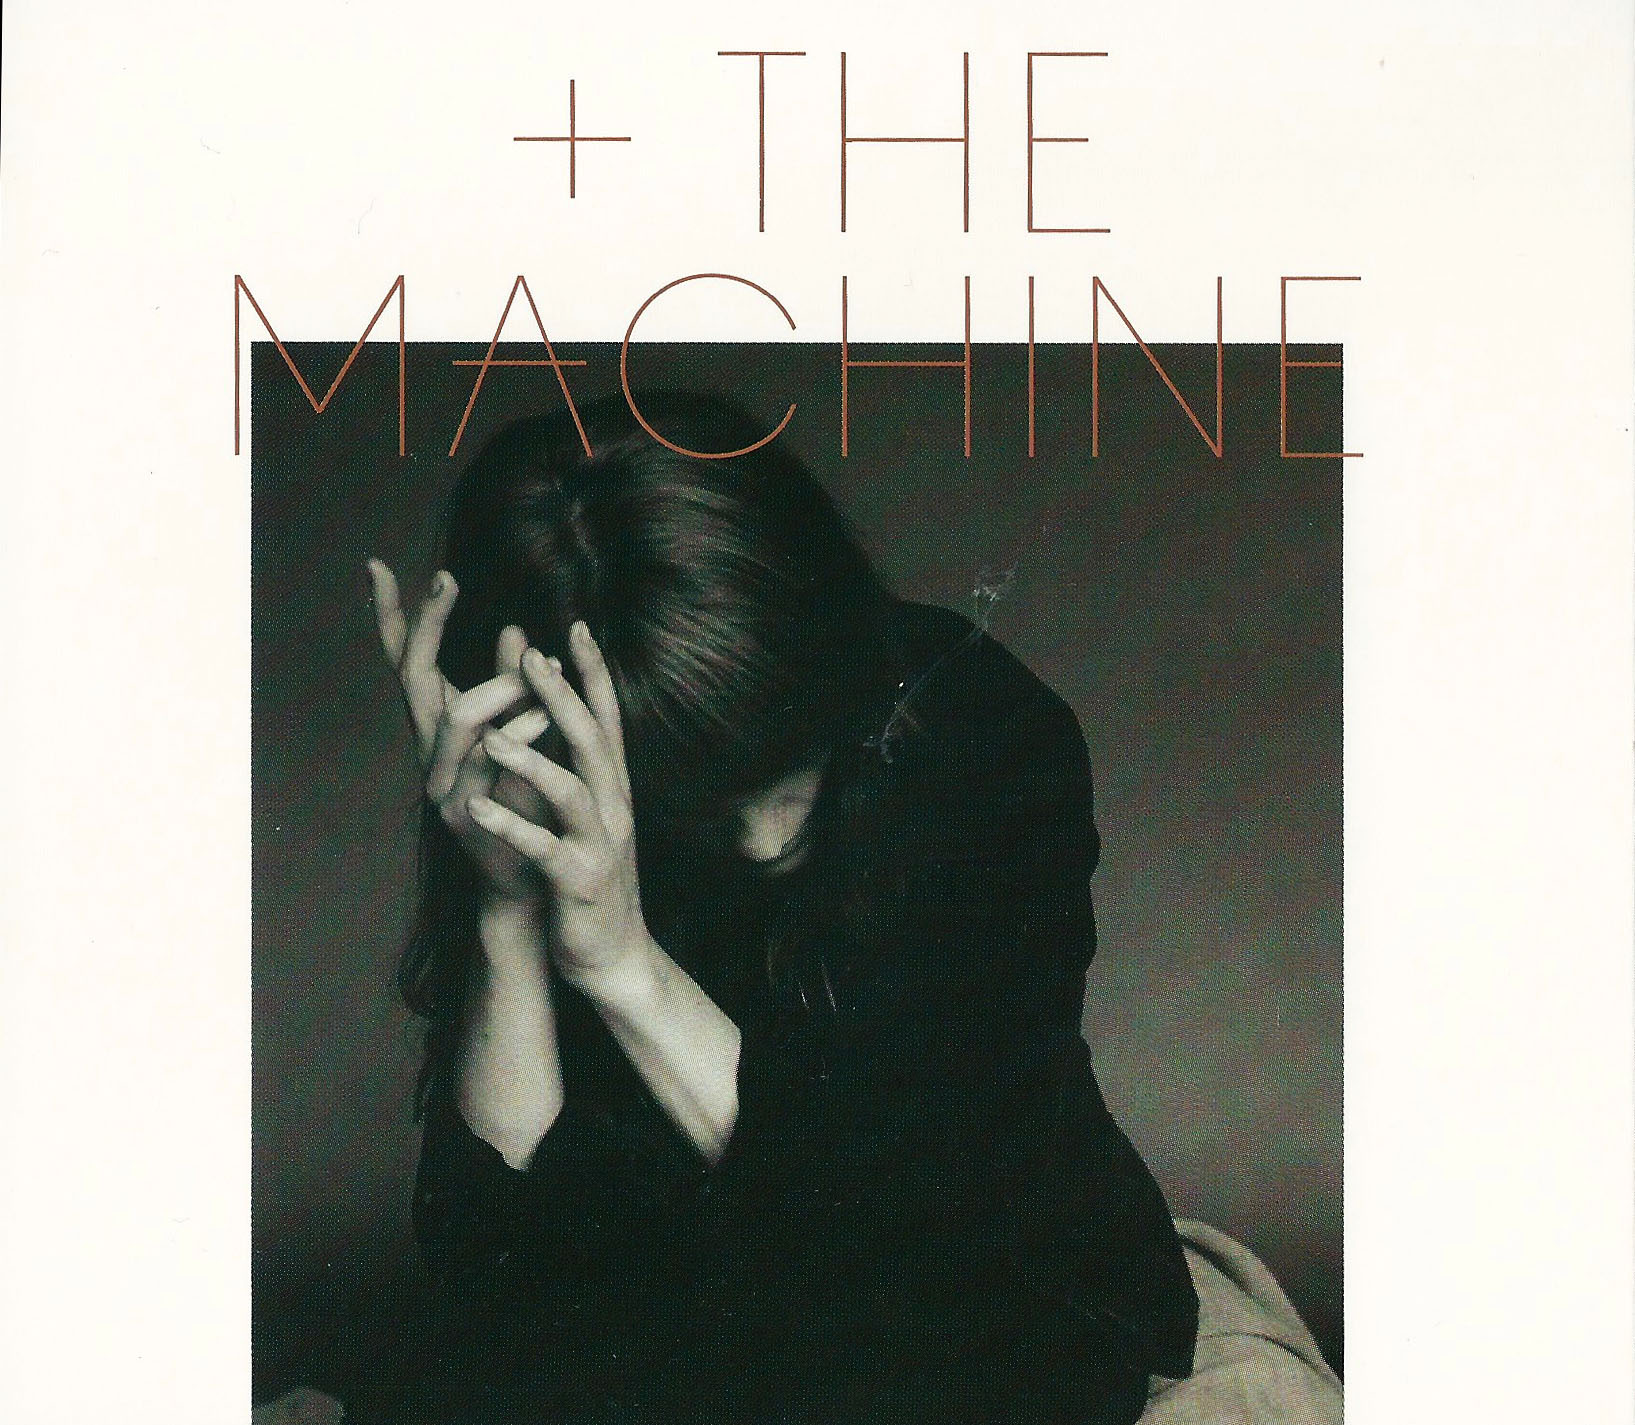 florence and the machine lungs deluxe edition zip download